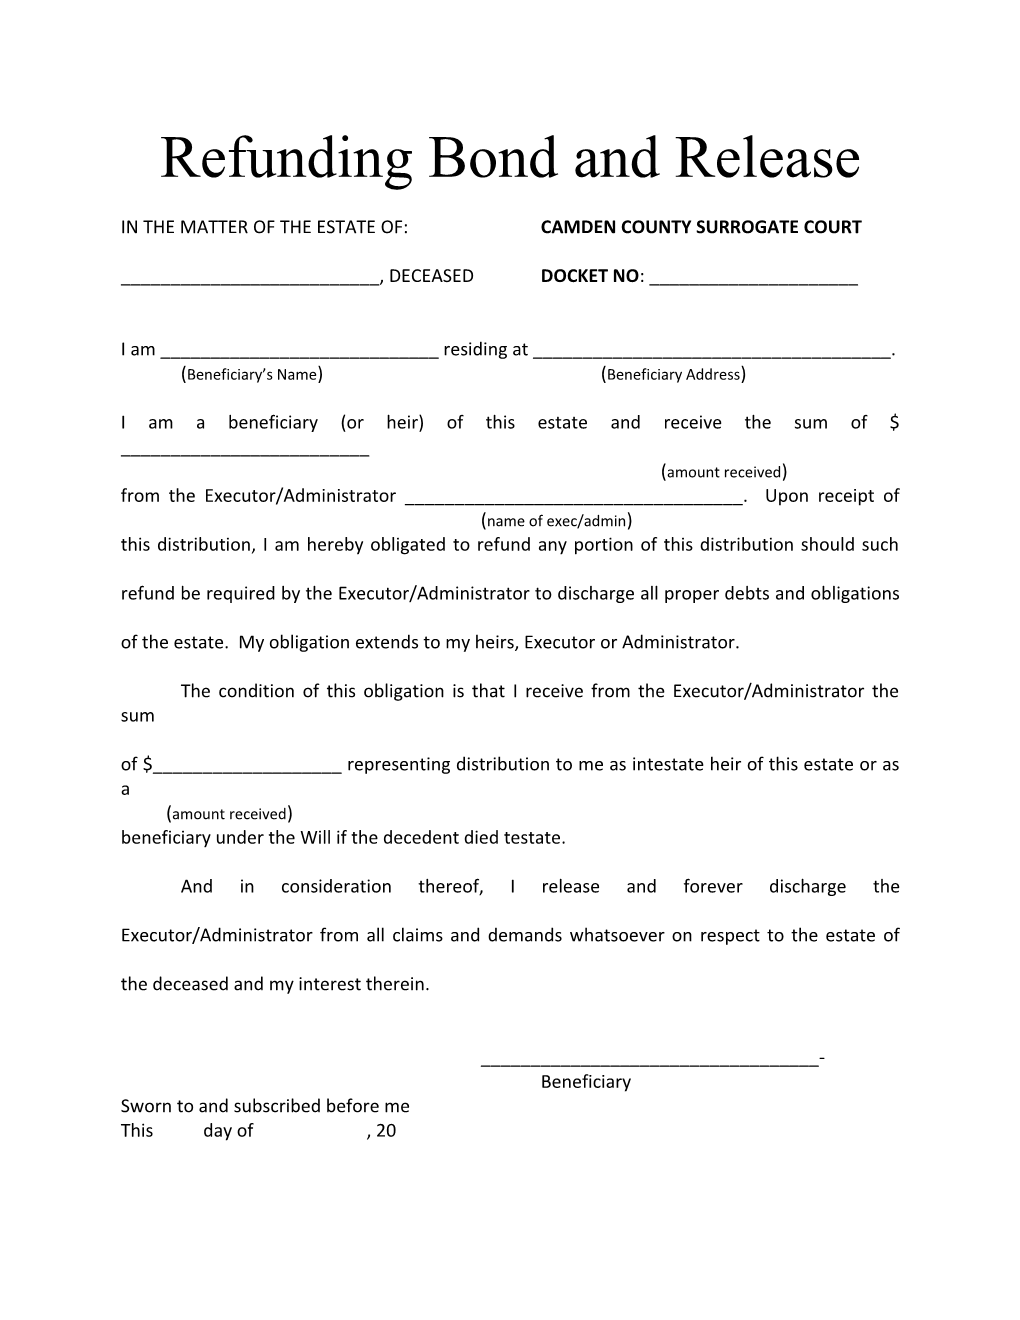 Refunding Bond and Release